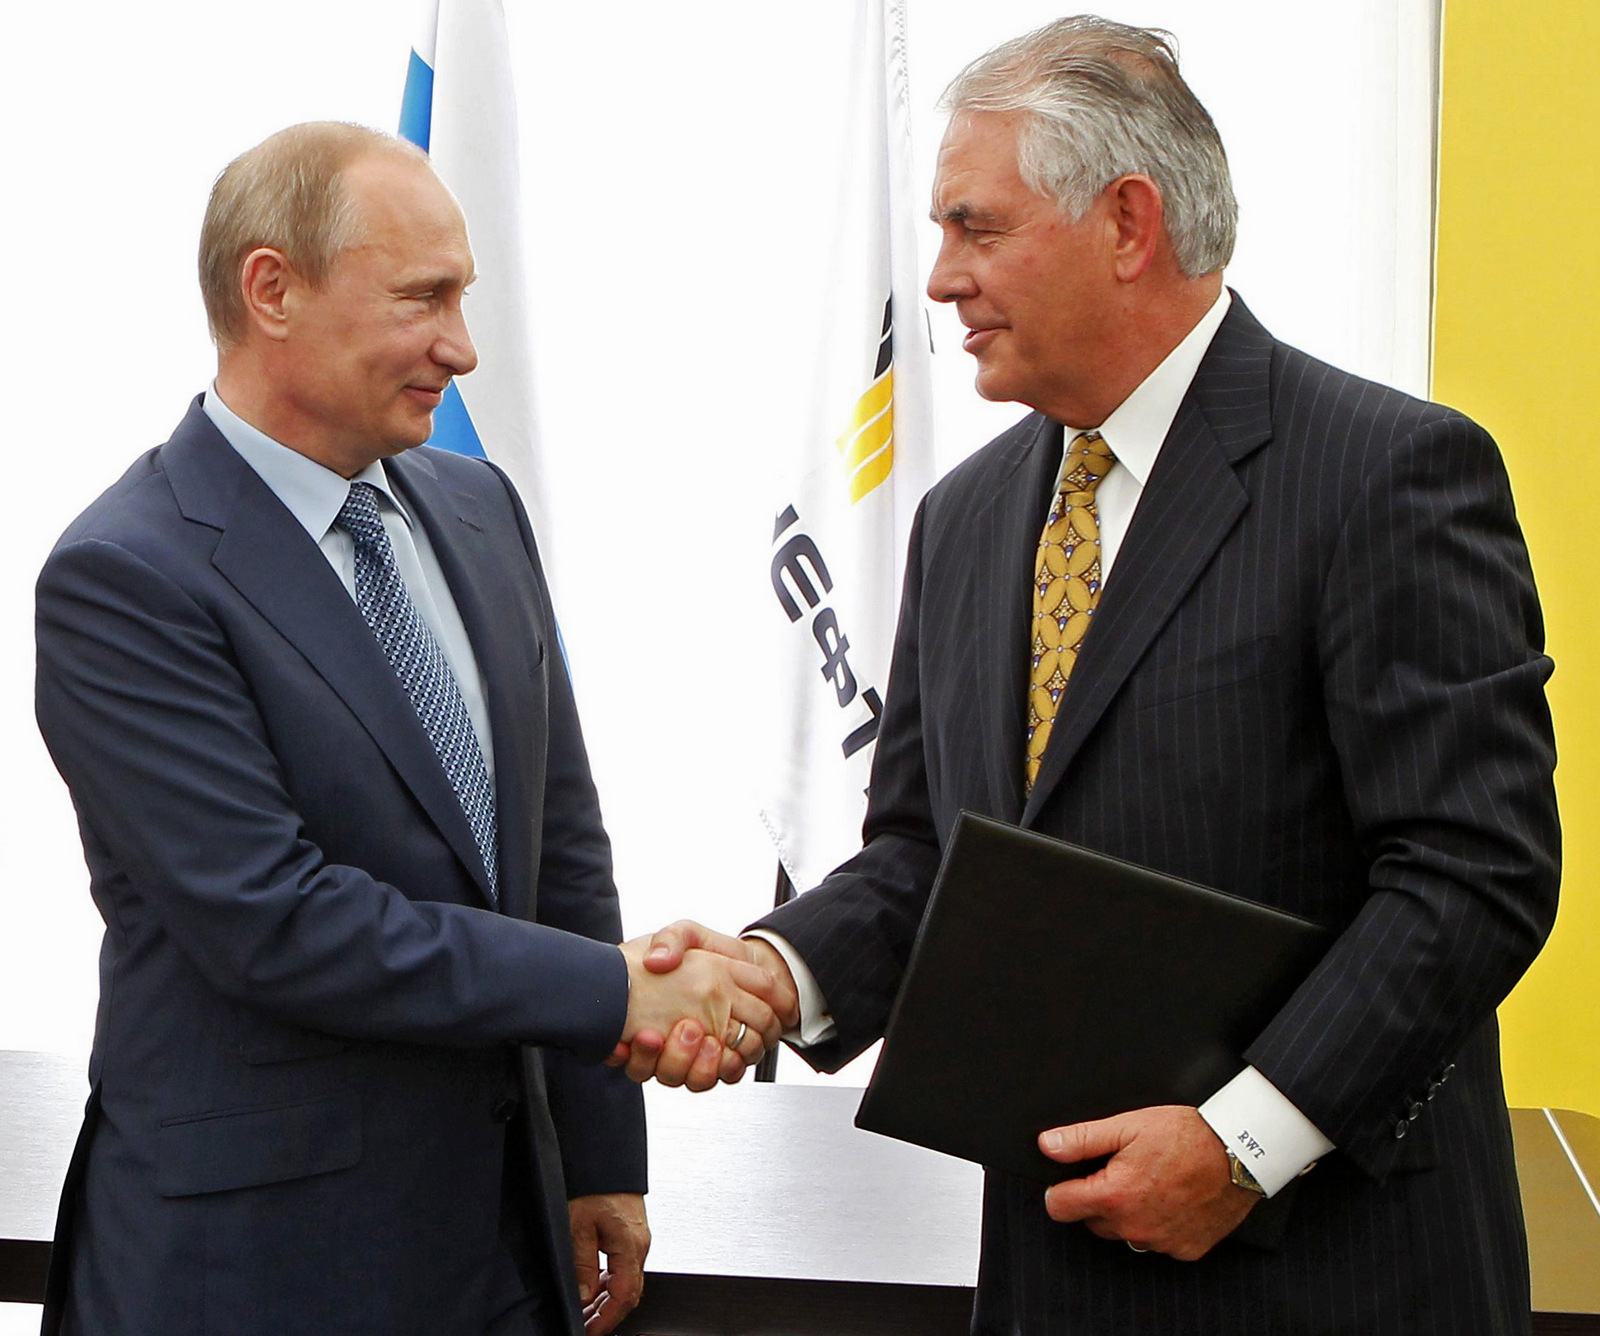 Russian President Vladimir Putin, left, and Exxon Mobil Corp. CEO Rex Tillerson shake hands at a signing ceremony of an agreement between state-controlled Russian oil company Rosneft and Exxon Mobil corporation at the Black Sea port of Tuapse, southern Russia, Friday, June 15, 2012. (AP Photo/RIA-Novosti, Mikhail Klimentyev, Presidential Press Service)